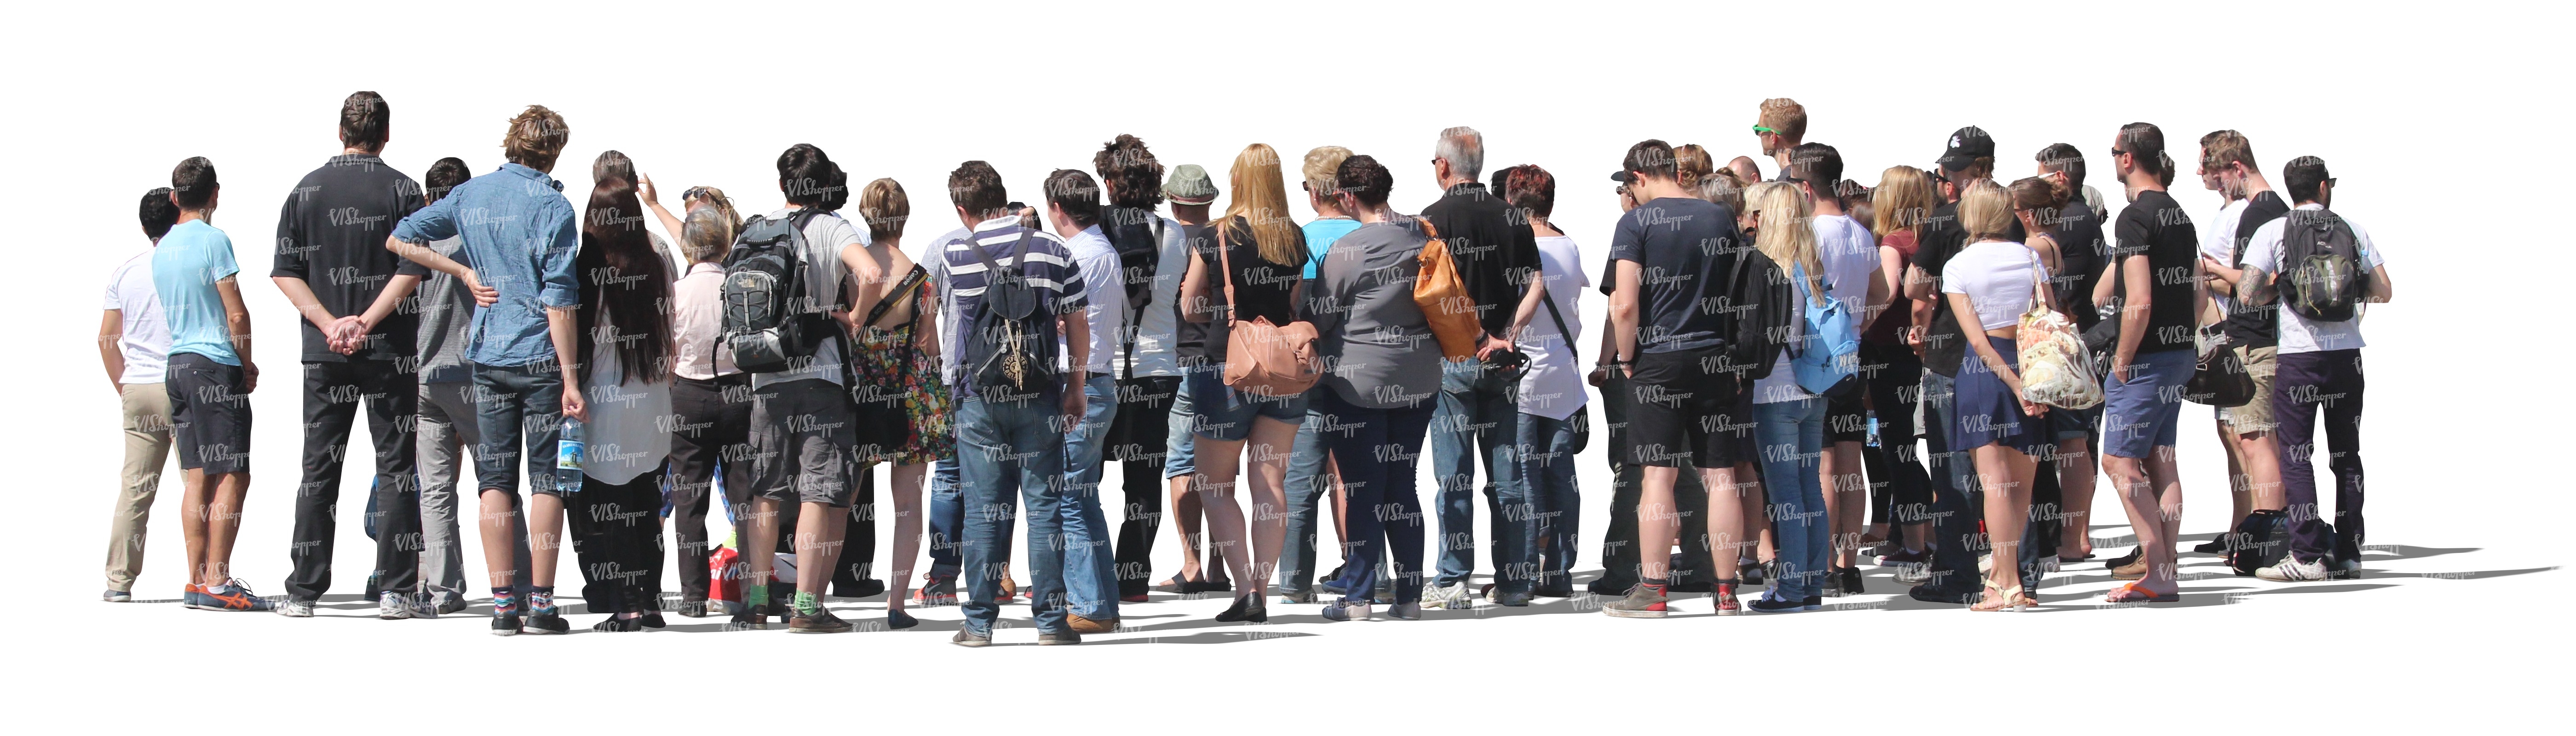 Group Of People Standing Seen From Behind Cut Out People Vishopper